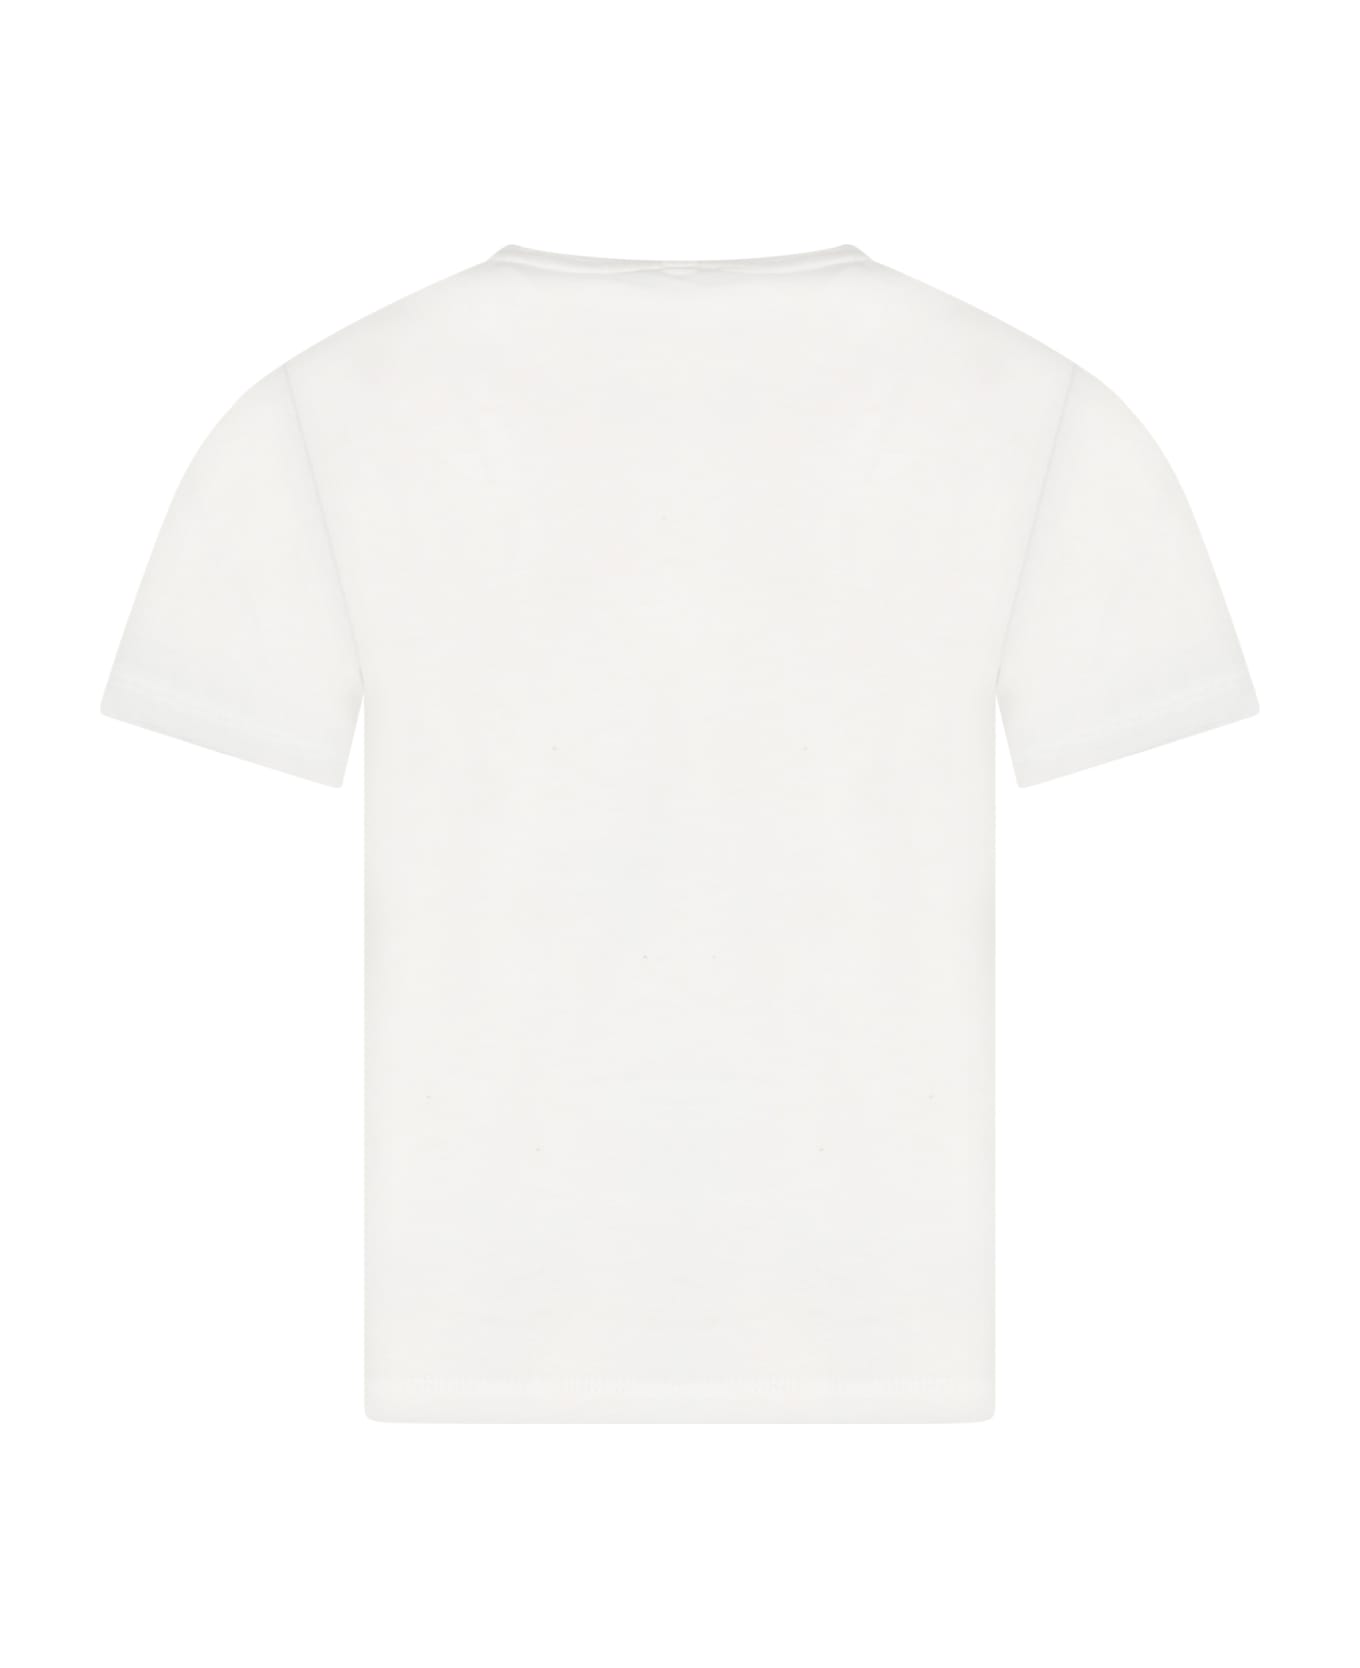 Stella McCartney Kids White T-shirt For Boy With Print And Logo - White